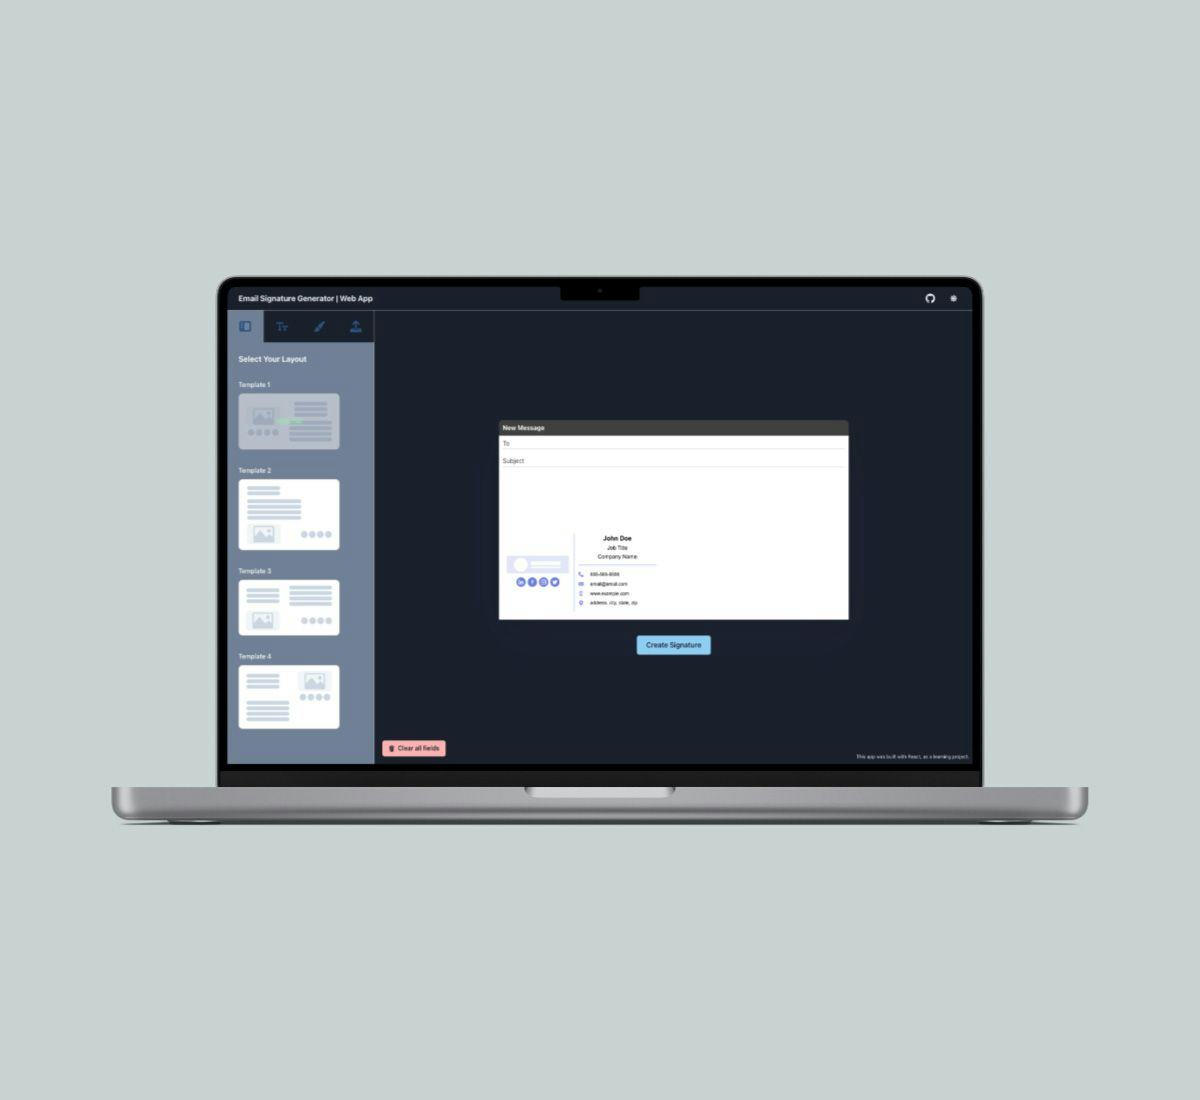 macbook air mockup with the signature app open in a web browser